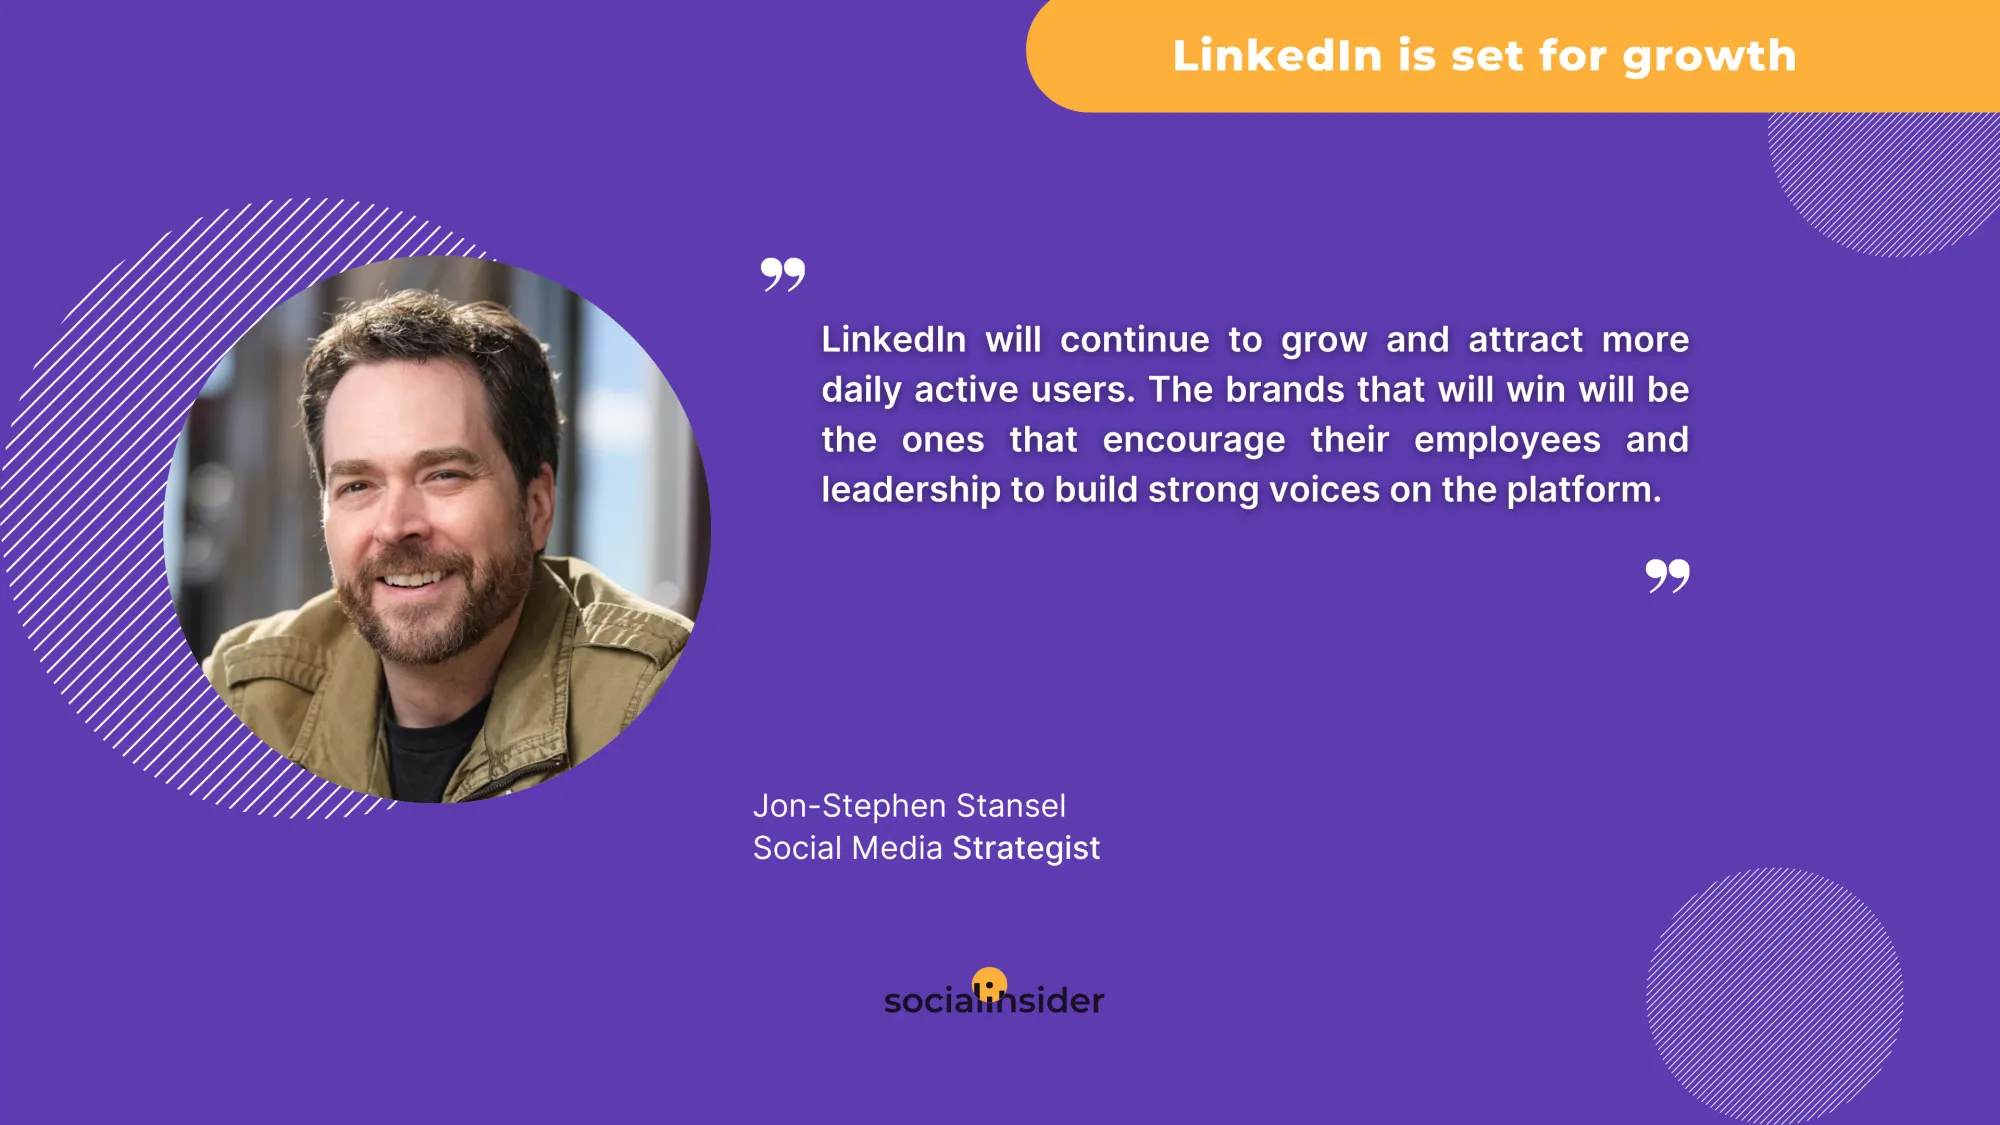 here is a quote from Jon-Stephen Stansel related to social media trends on linkedin